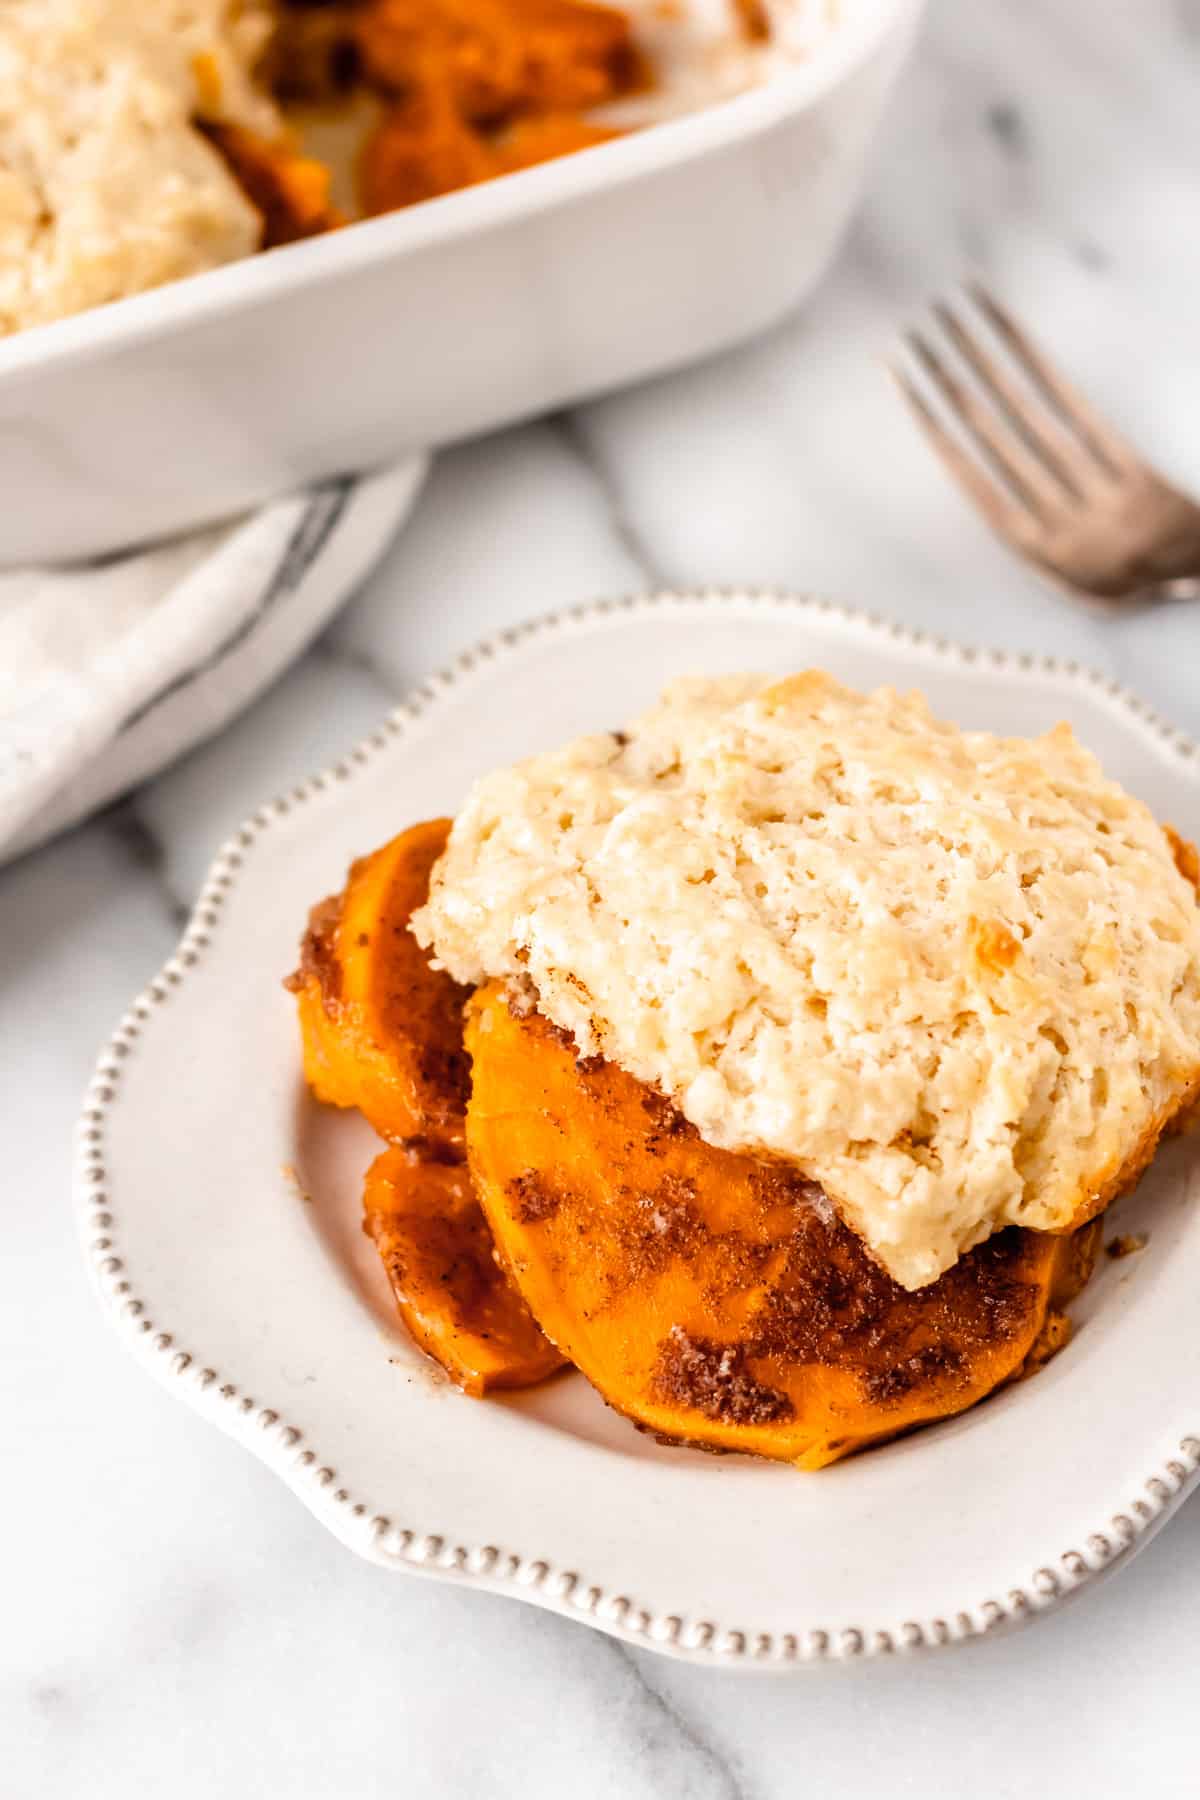 A serving of sweet potato cobbler on a small white plate with a fork and baking dish in the background.